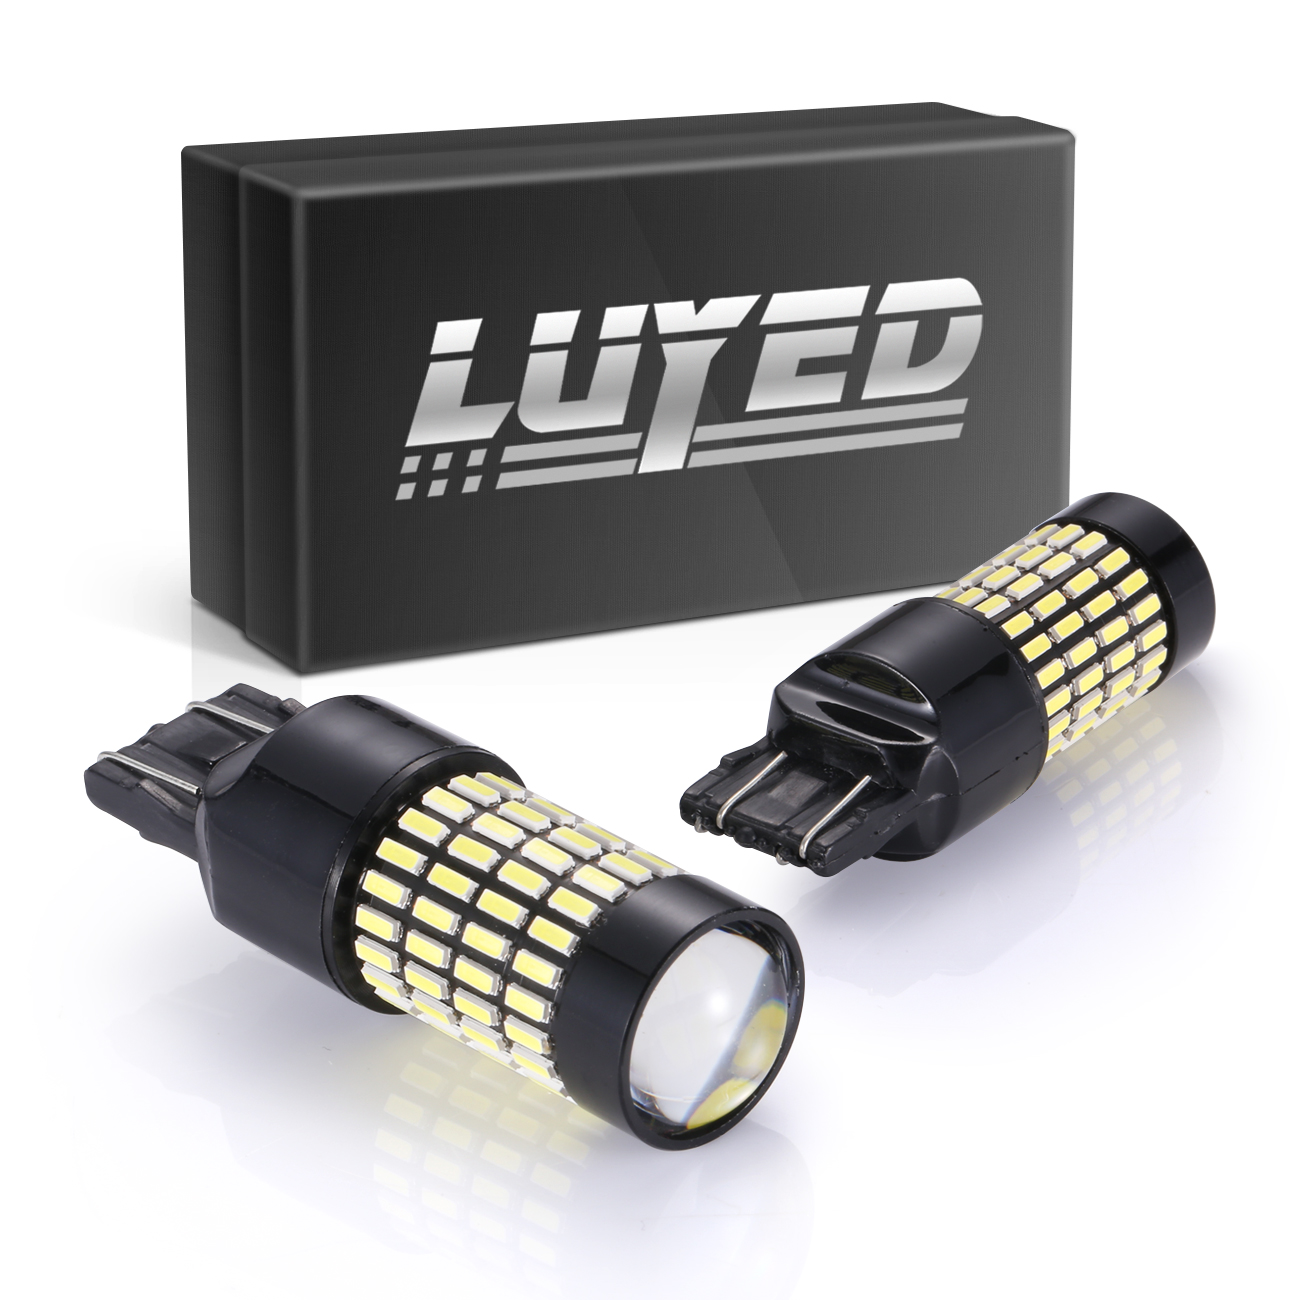 Brightest LED in market LUYED 2 X 1700 Lumens Extremely Bright 1156 4014 102-EX Chipsets 1156 1141 1003 7506 LED Bulbs Used For Backup Reverse Lights,Xenon White